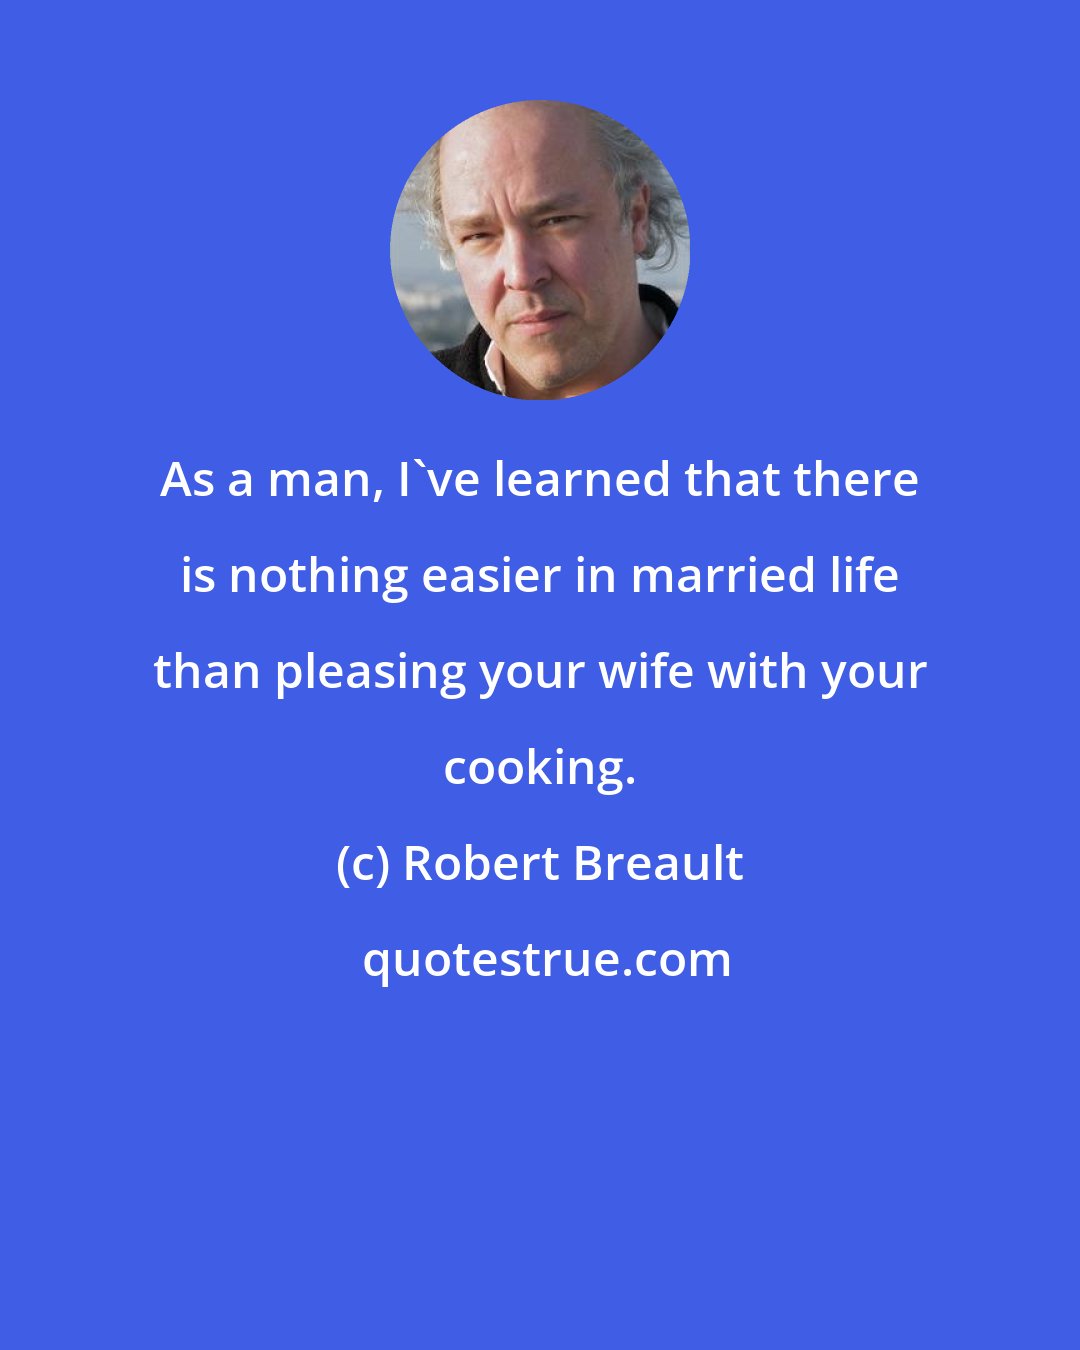 Robert Breault: As a man, I've learned that there is nothing easier in married life than pleasing your wife with your cooking.